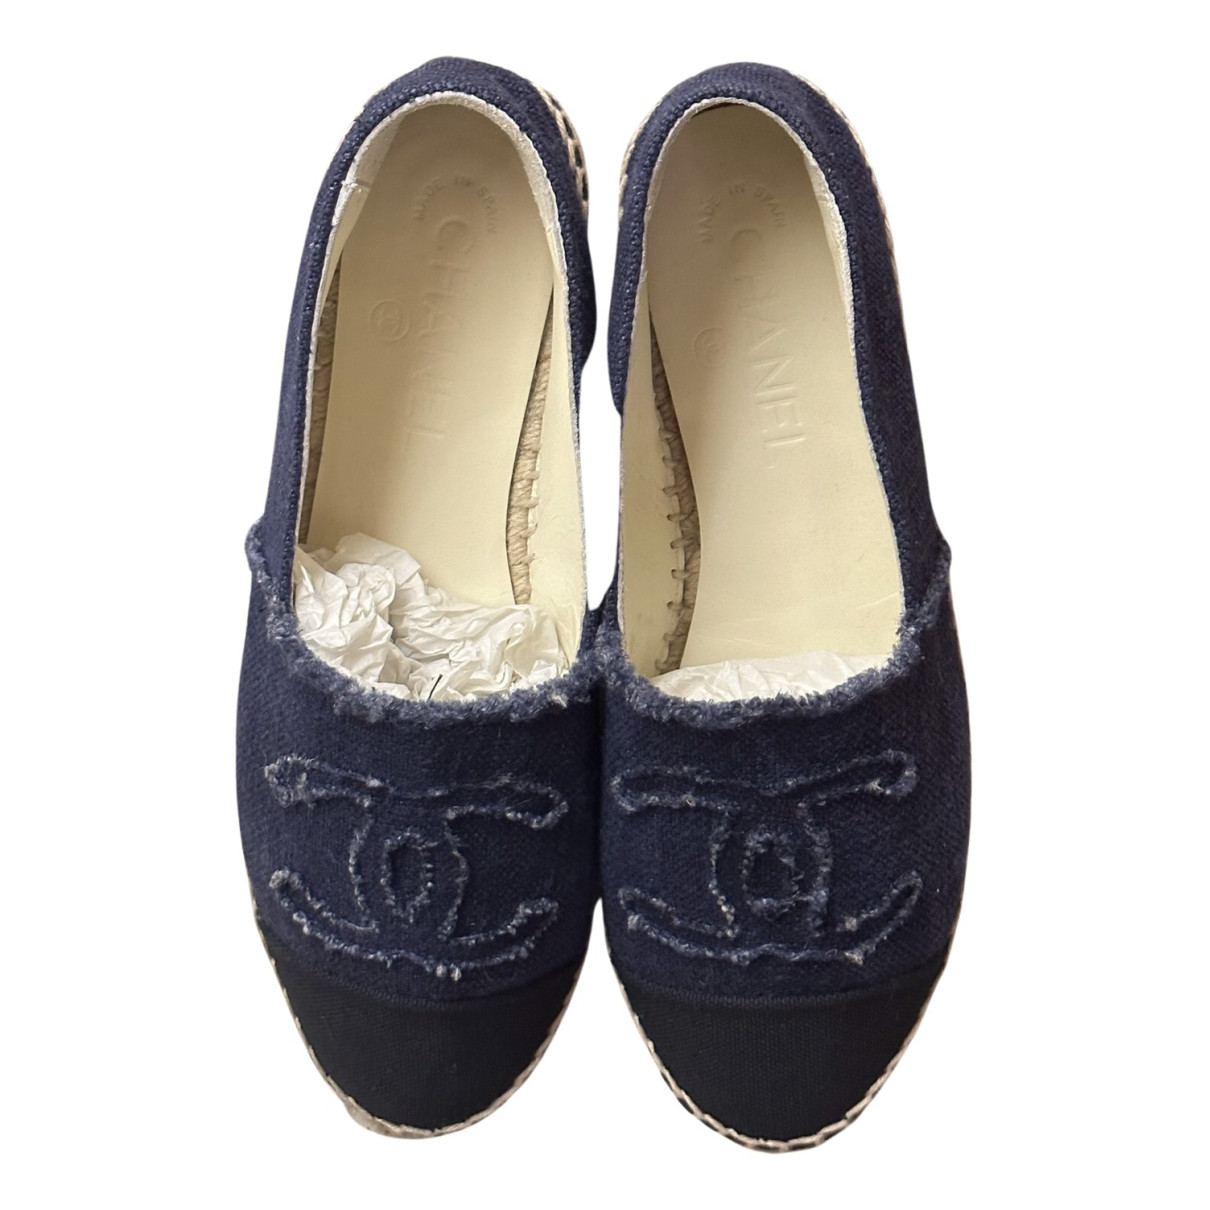 shoes Chanel espadrilles for Female Cloth 37 EU. Used condition